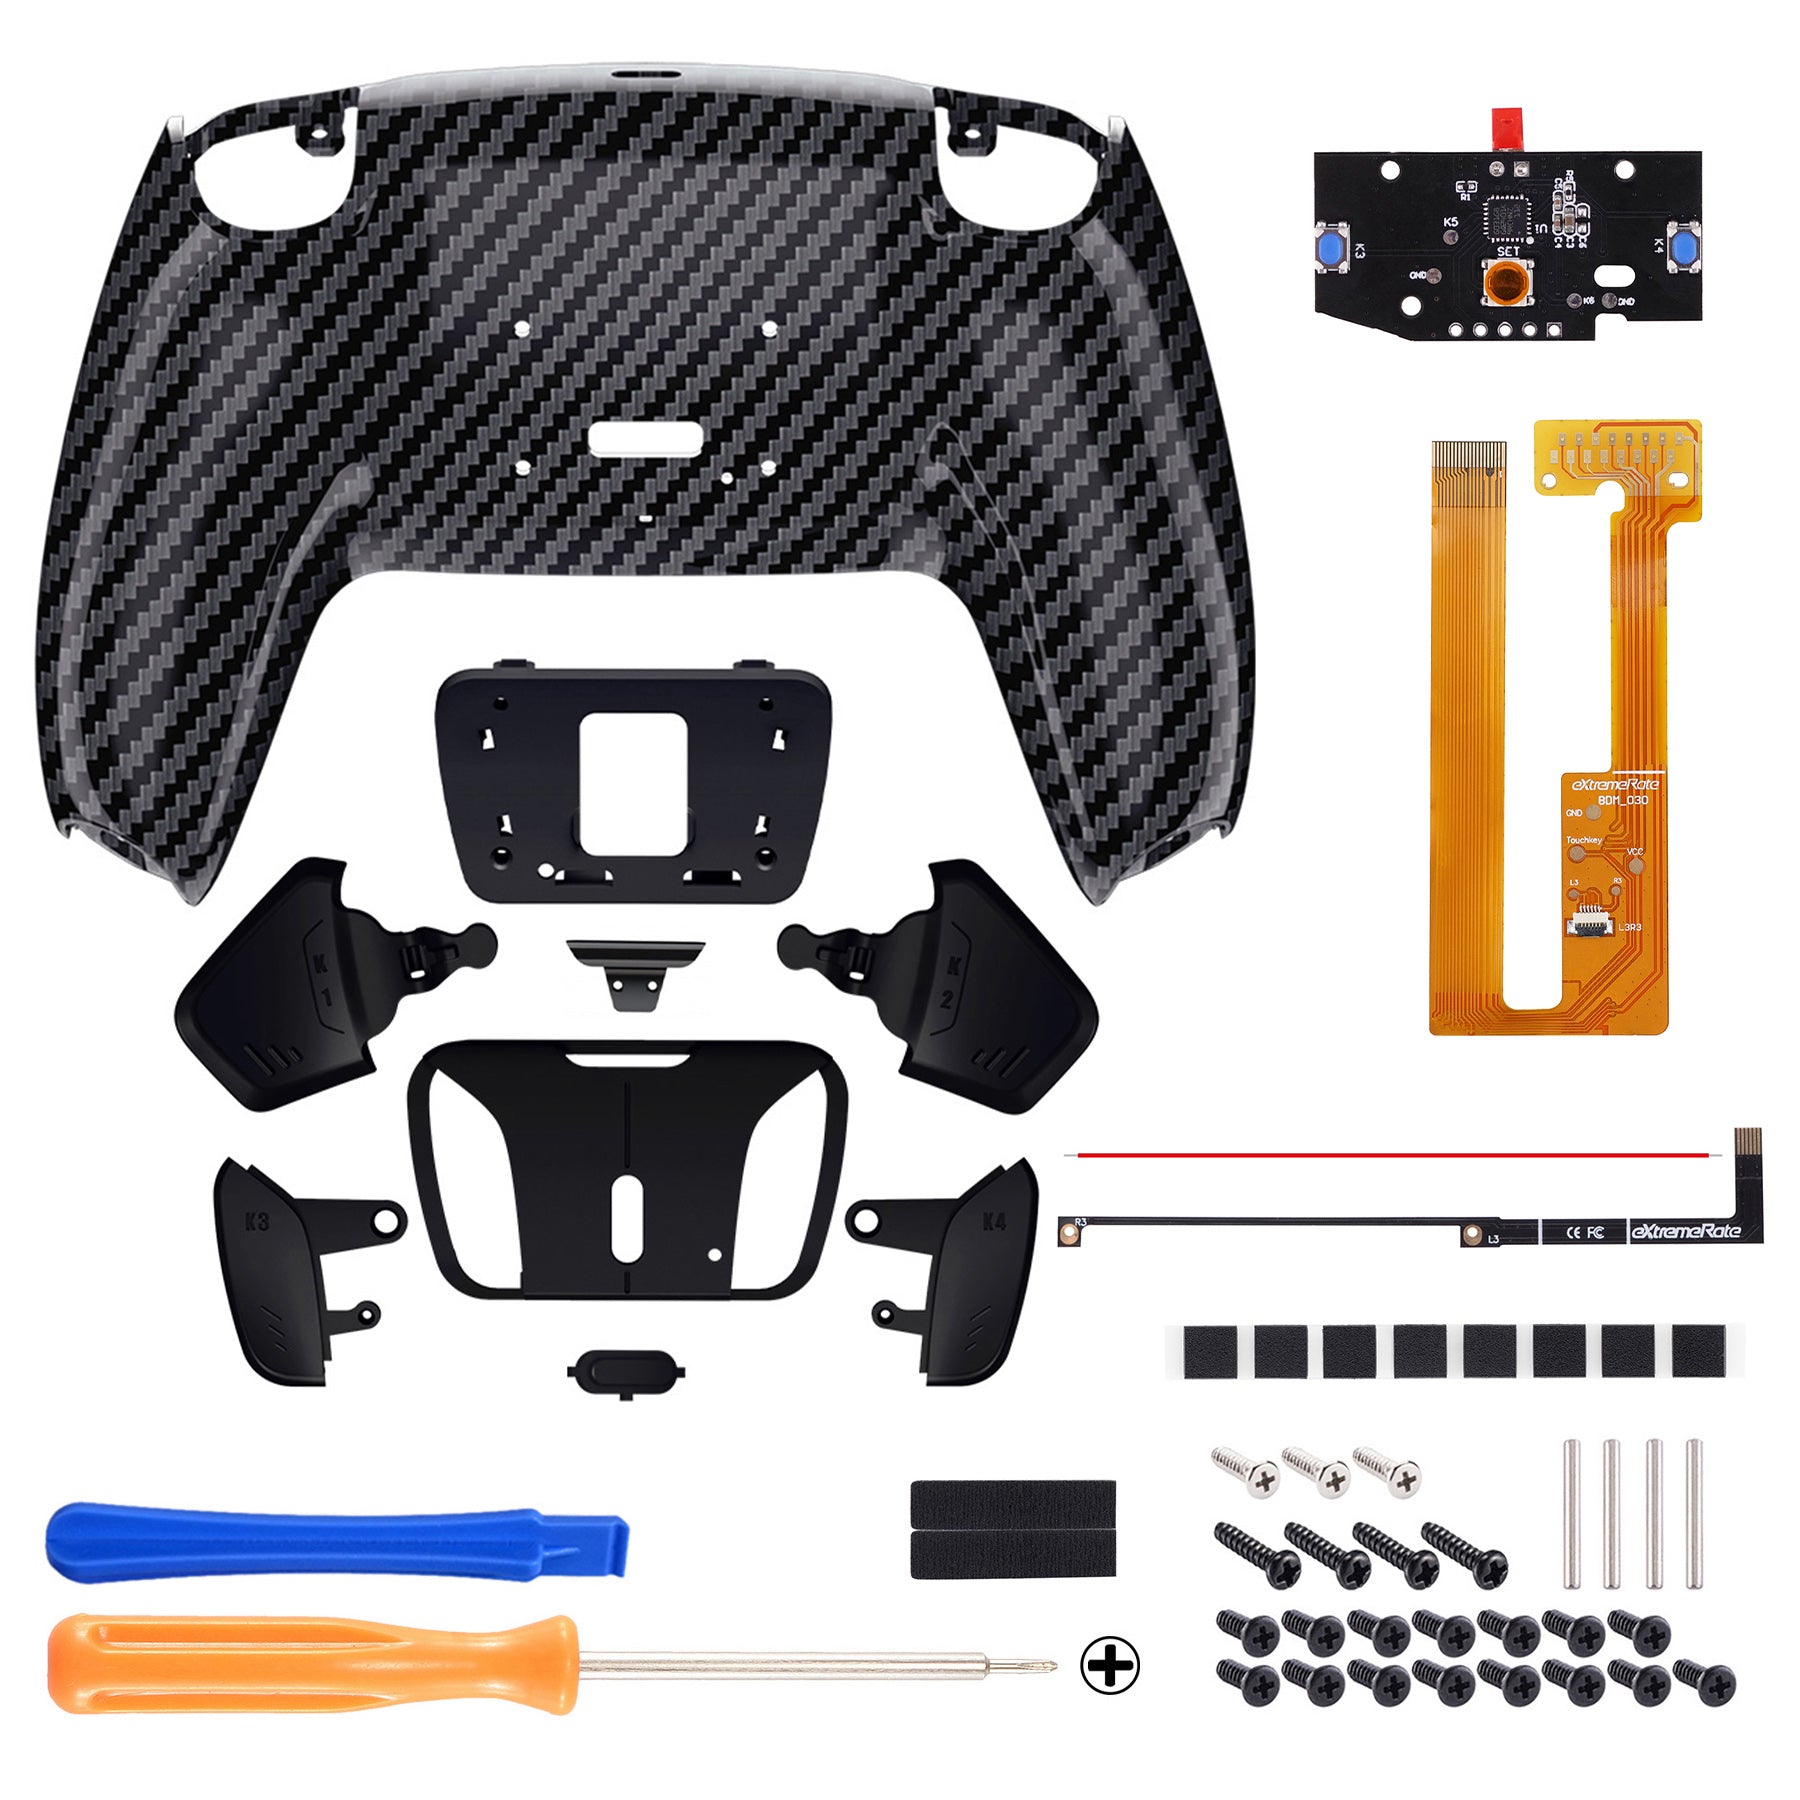 eXtremeRate Remappable RISE 4.0 Remap Kit for PS5 Controller BDM-030/040 - Graphite Carbon Fiber eXtremeRate